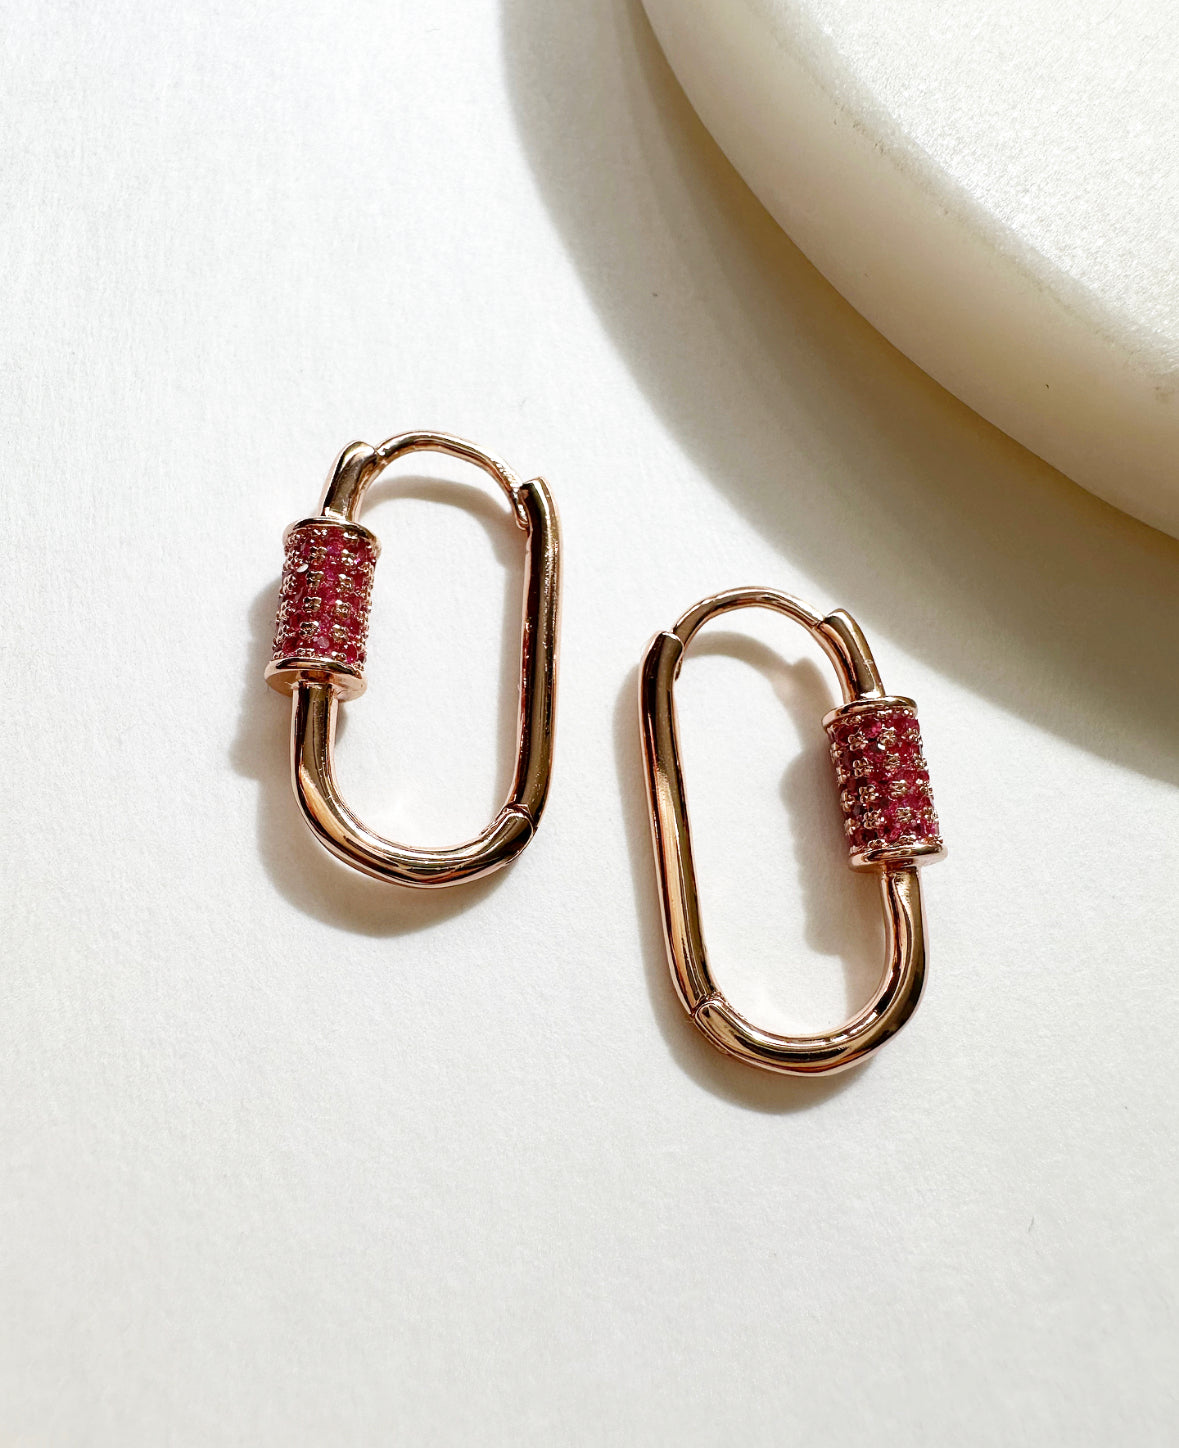 Rose gold carabiner-shaped Cherry Blossom Journey Earrings with pink pavé crystal detail.